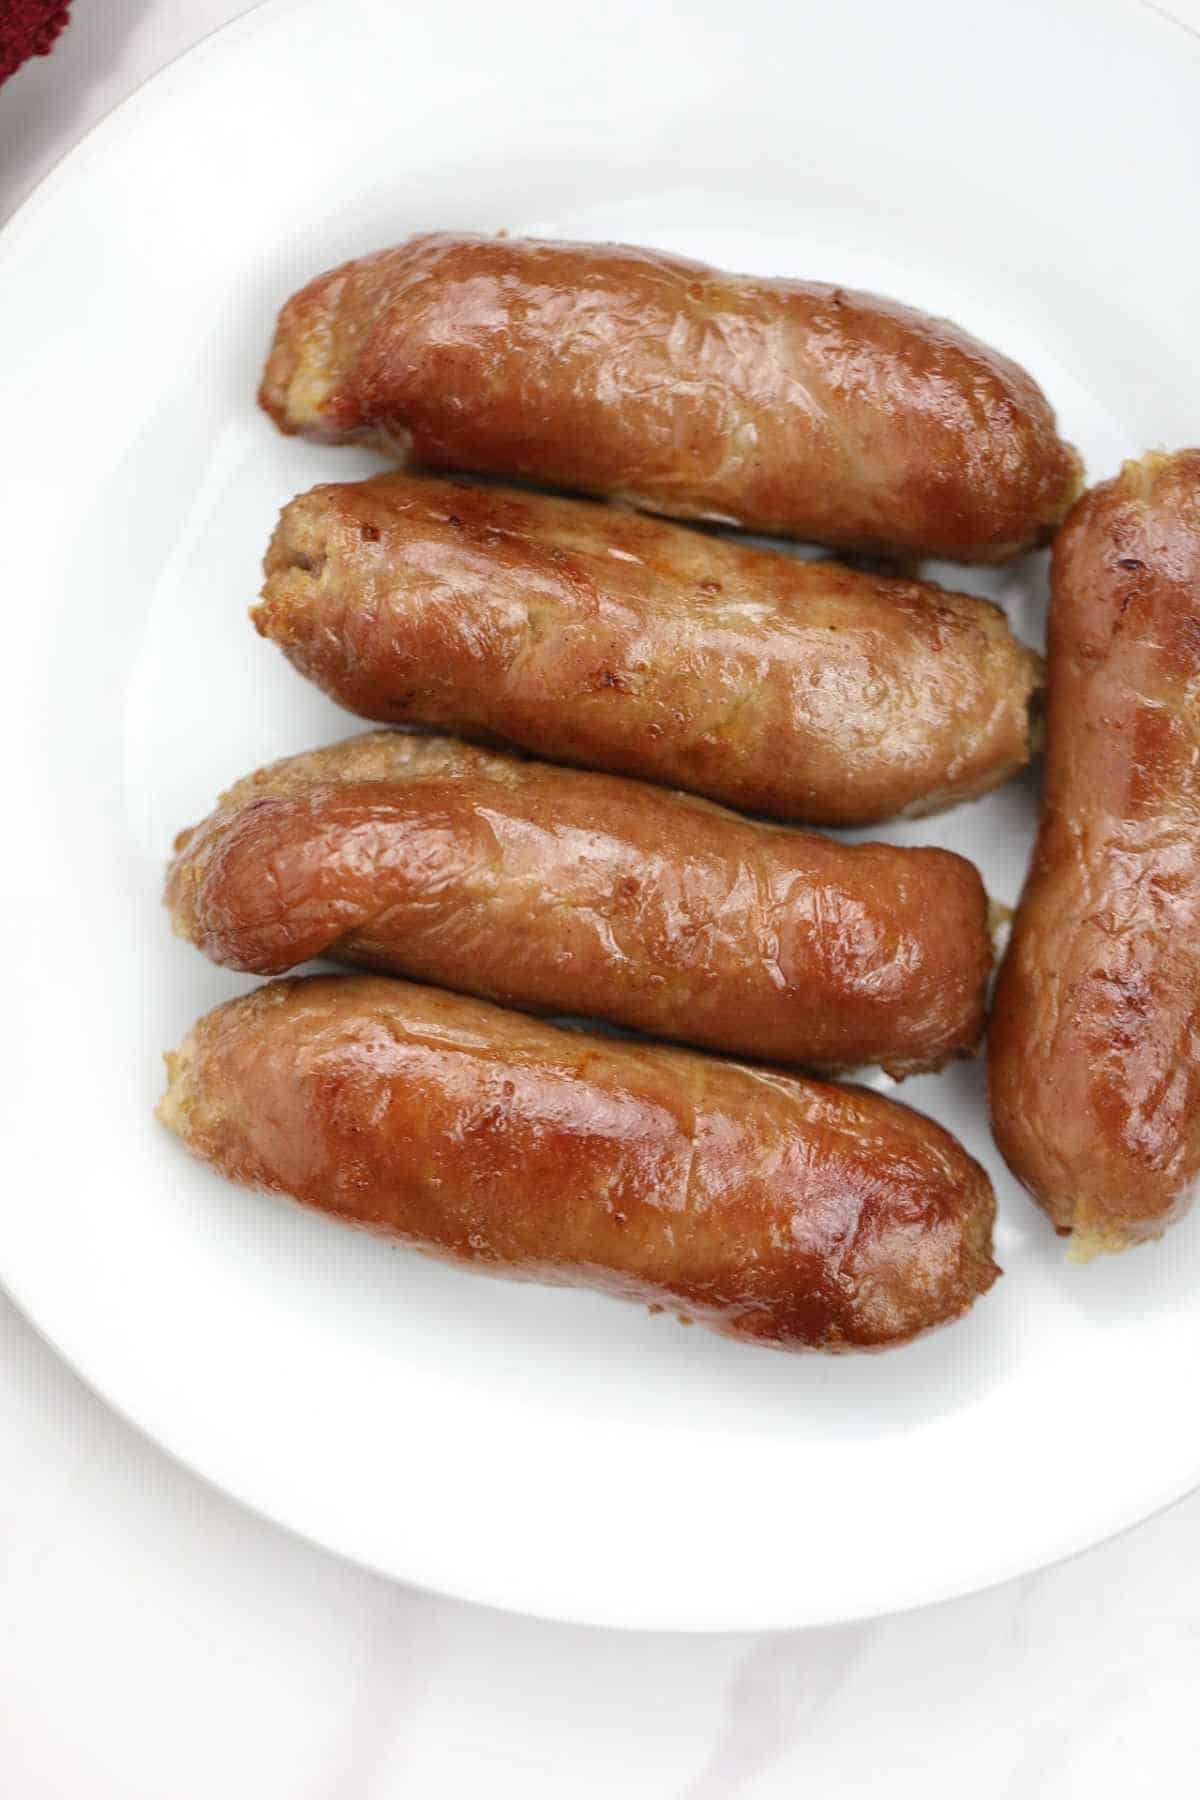 5 sausages on a white plate.